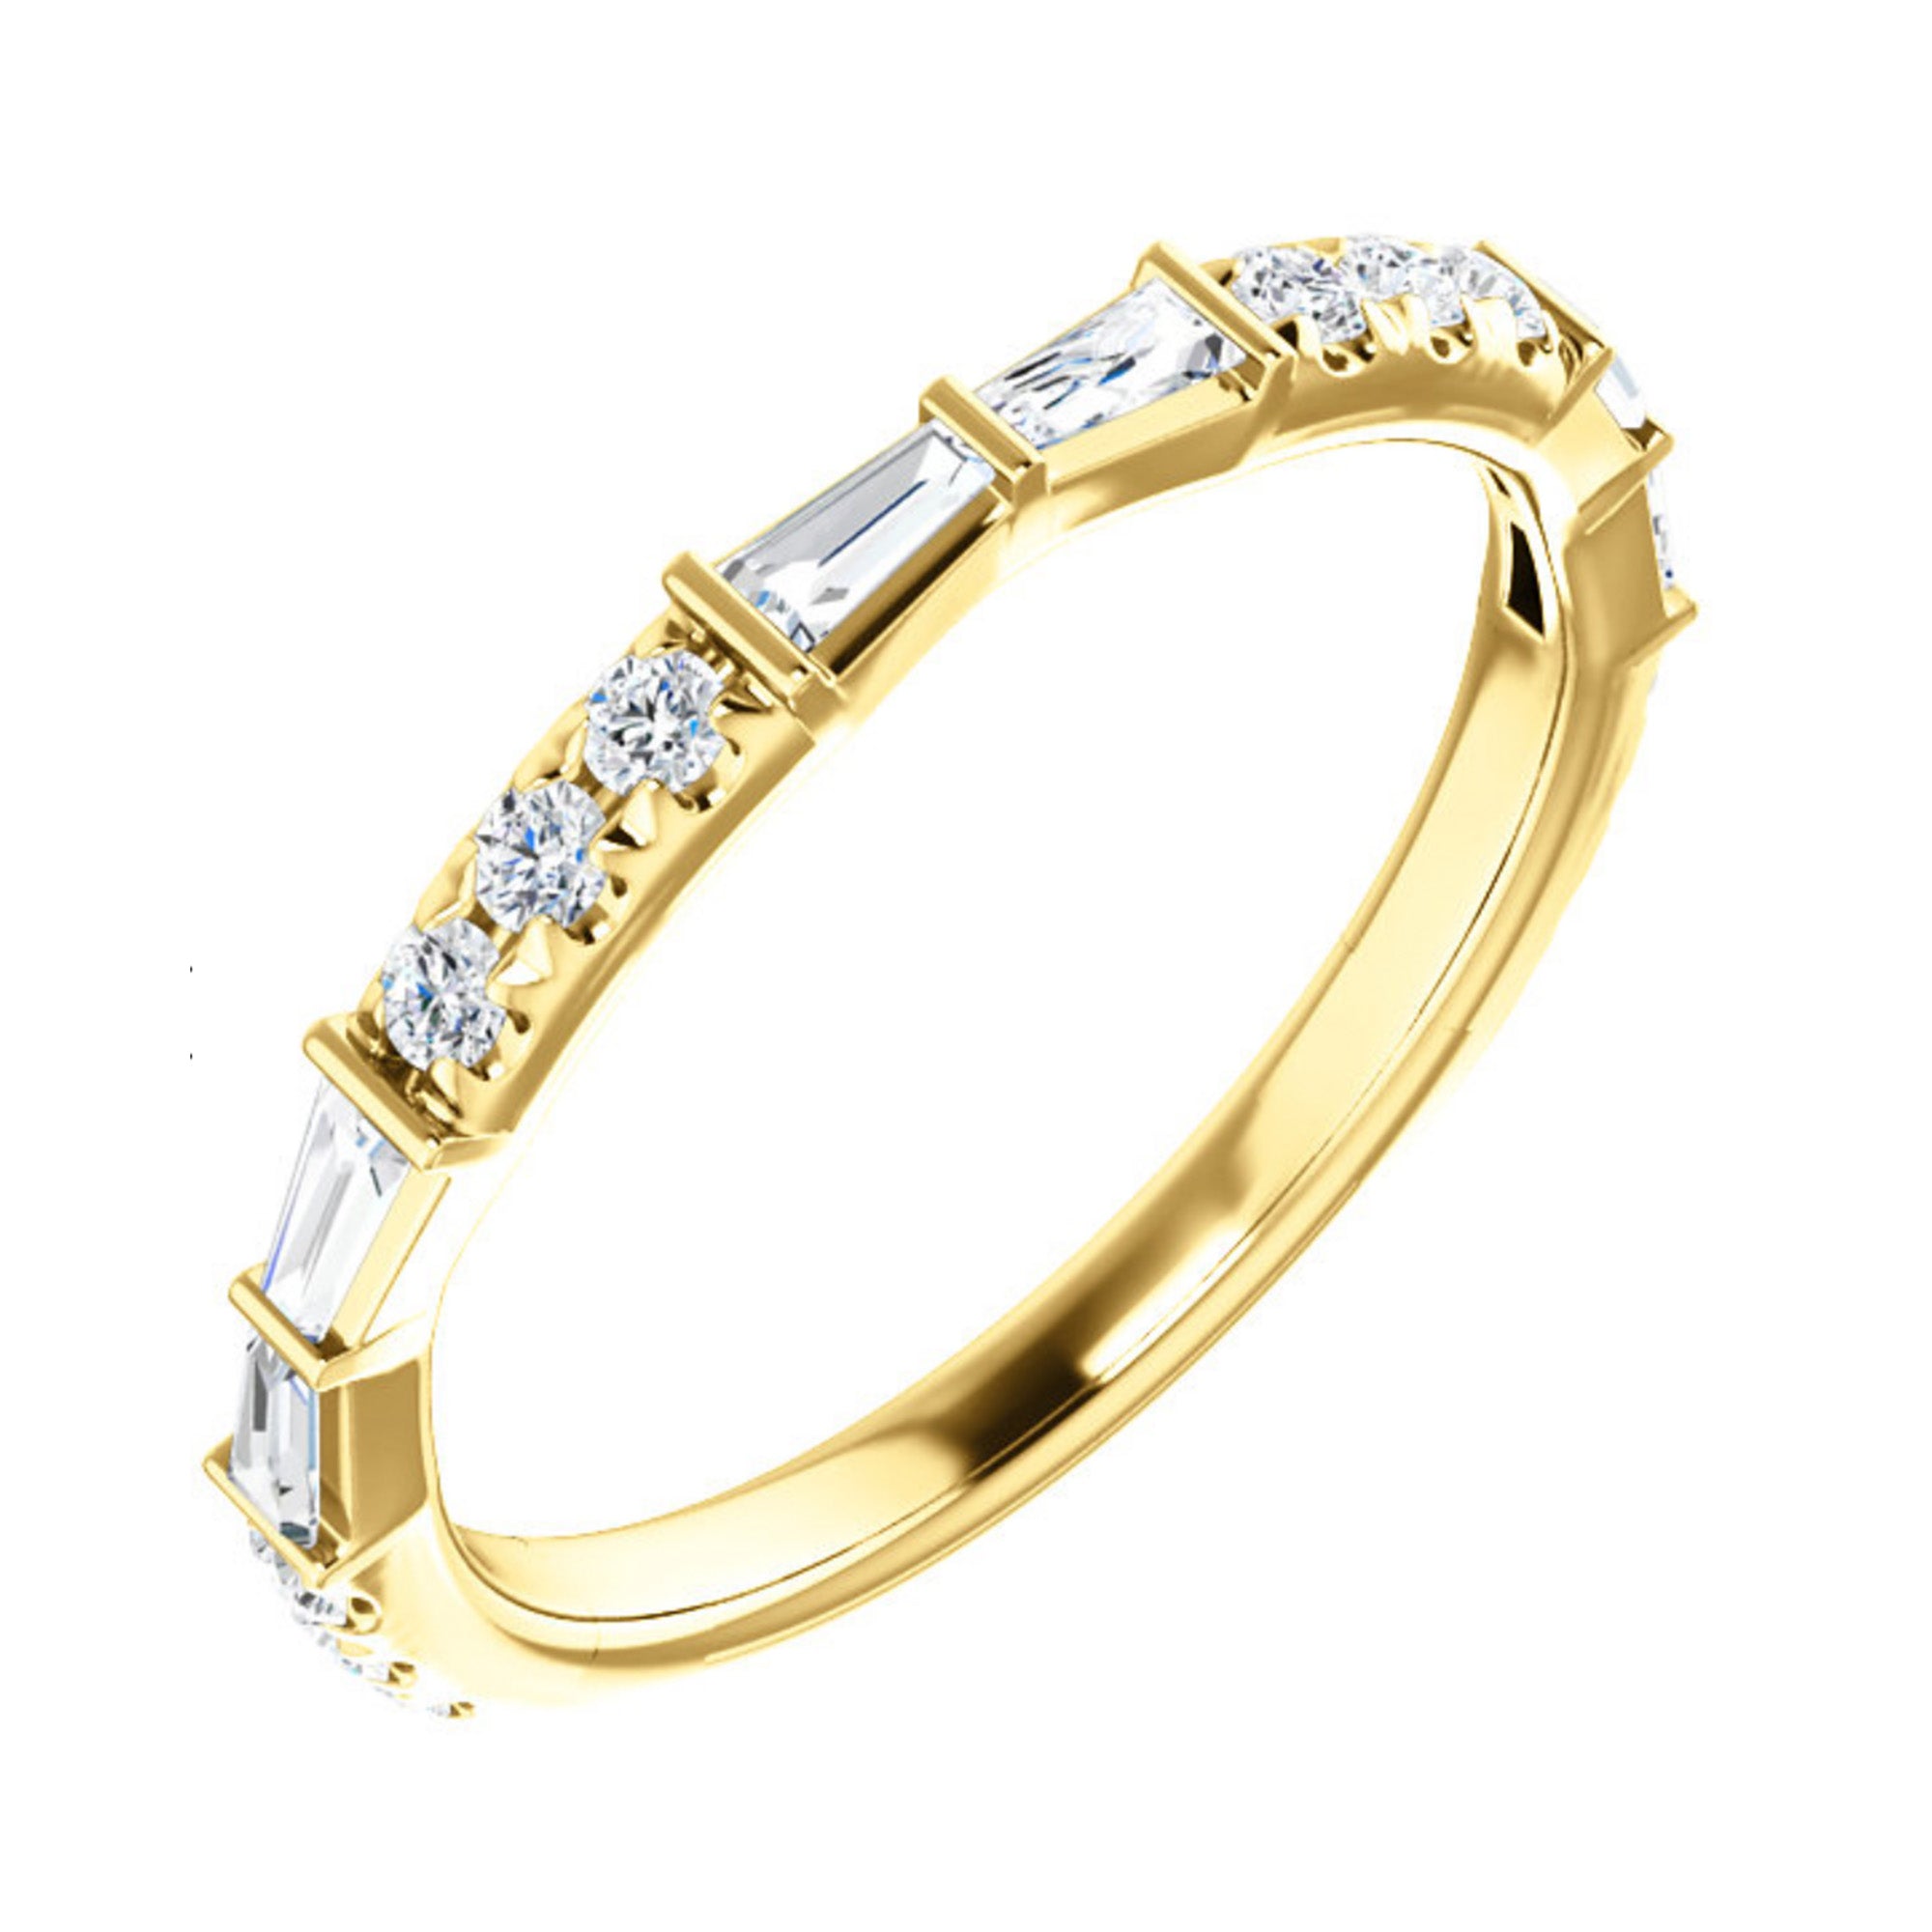 Round and Tapered Baguette Diamond Anniversary Band in White, Yellow or Rose Gold - Talisman Collection Fine Jewelers